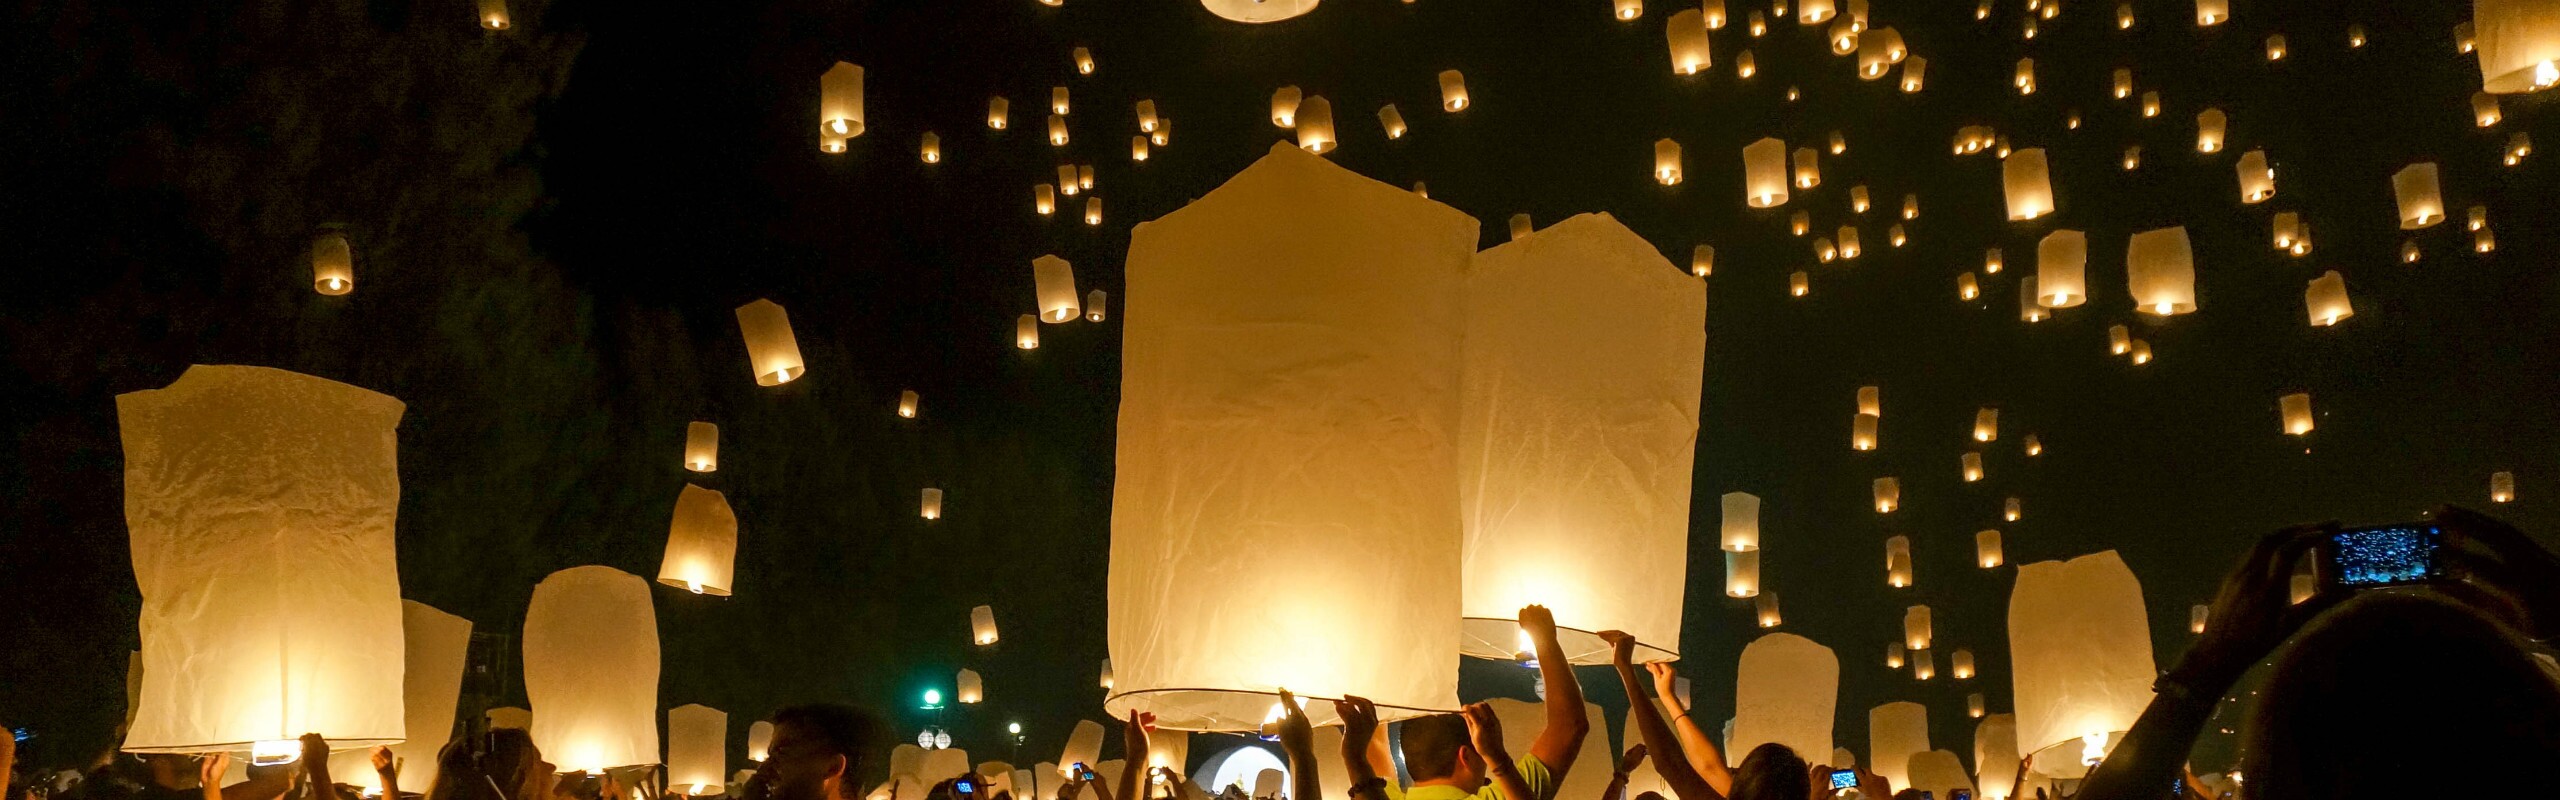 How to Celebrate Loy Krathong Festival